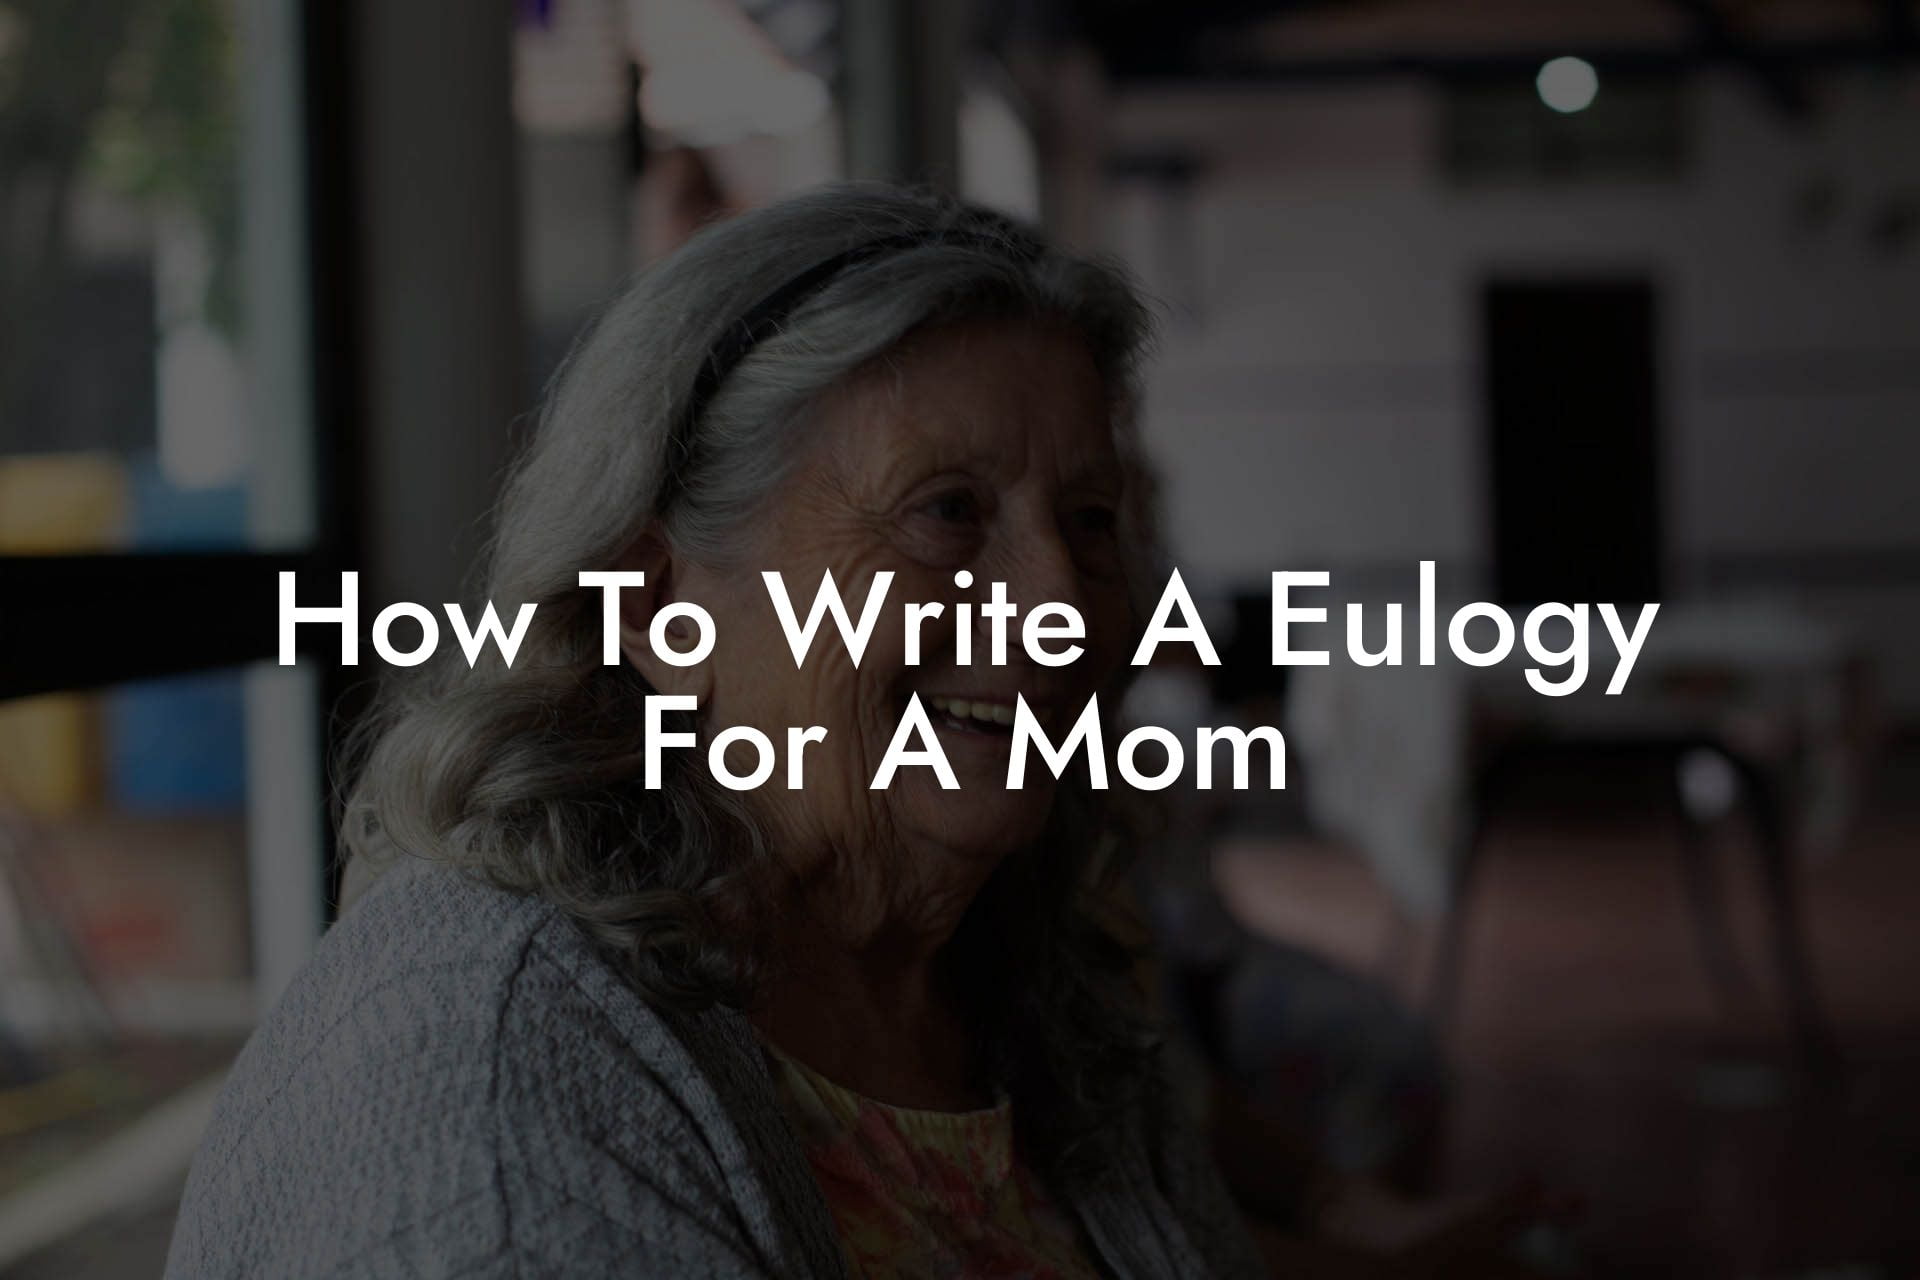 How To Write A Eulogy For A Mom